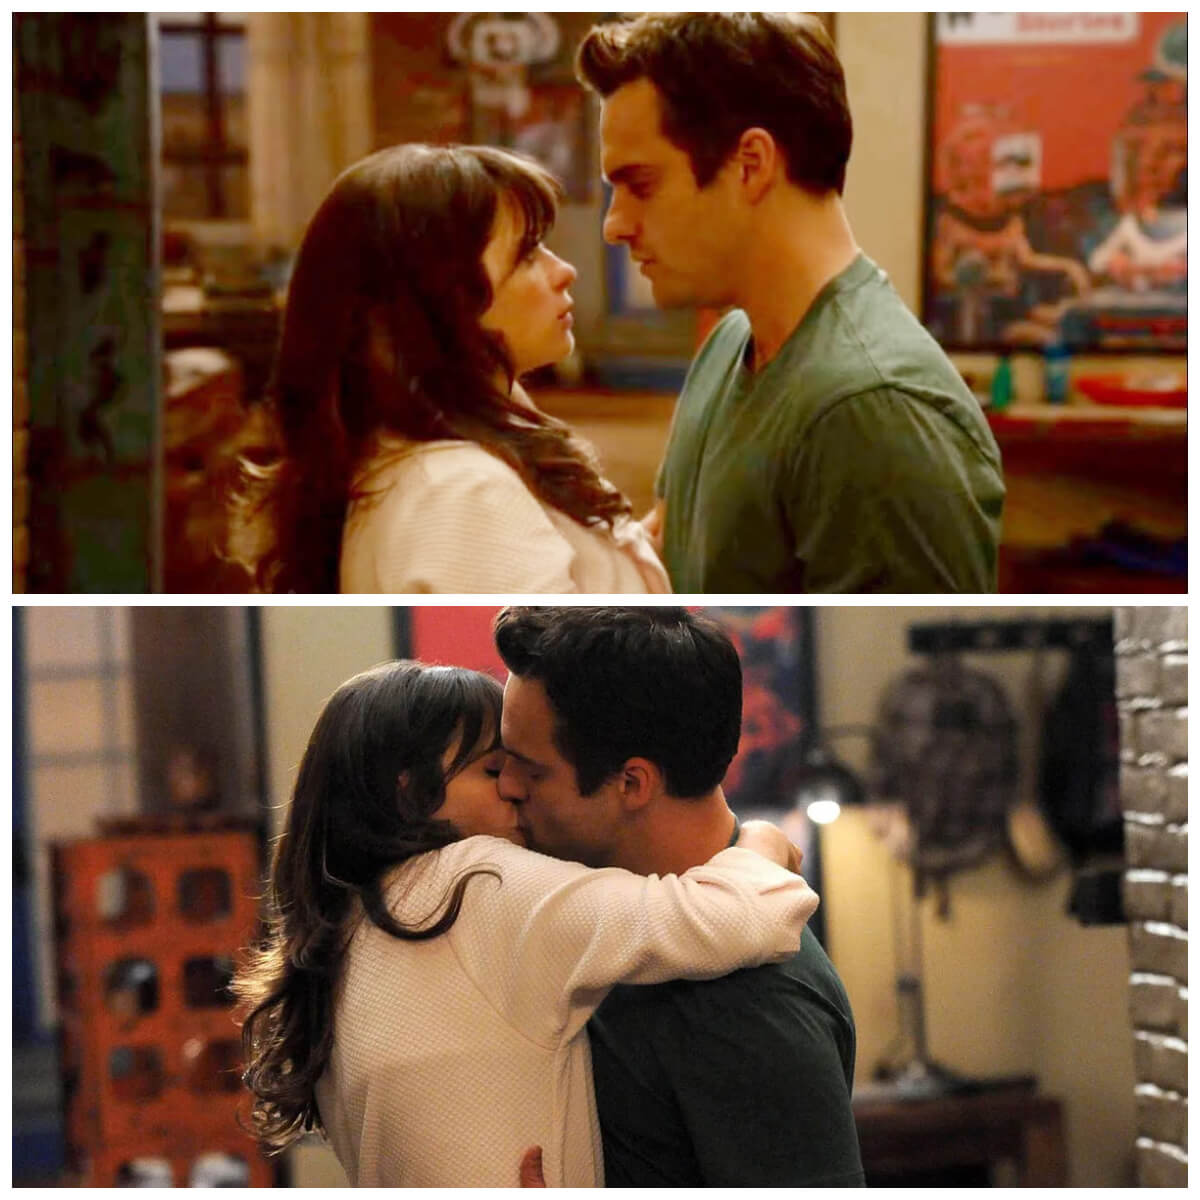 TV couples Jess Day and Nick Miller from New Girl